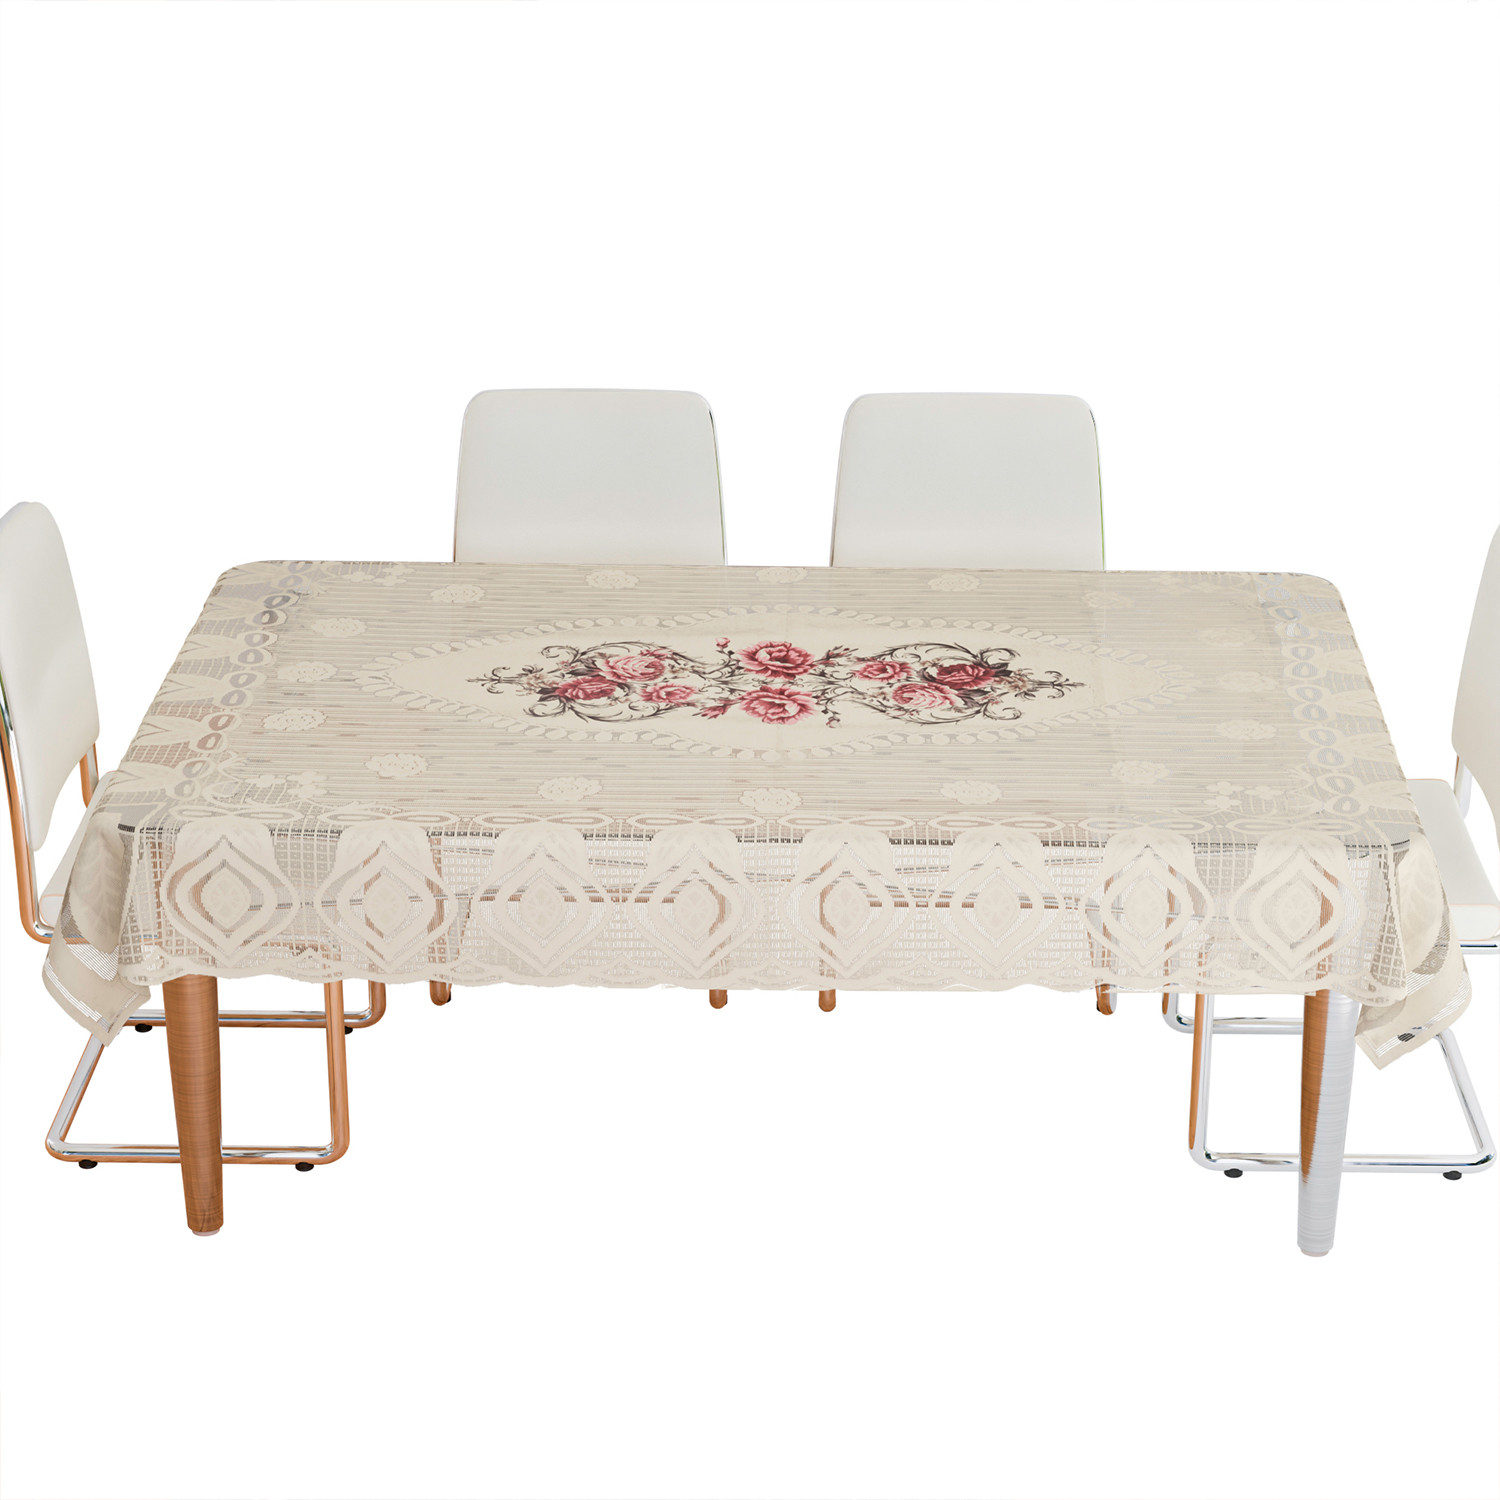 Kuber Industries Dining Table Cover | Cotton Table Cloth Cover | 6-Seater Table Cloth | Glory Table Cover | Table Protector | Table Cover for Dining Table | 60x90 Inch | DTC | Cream & Pink